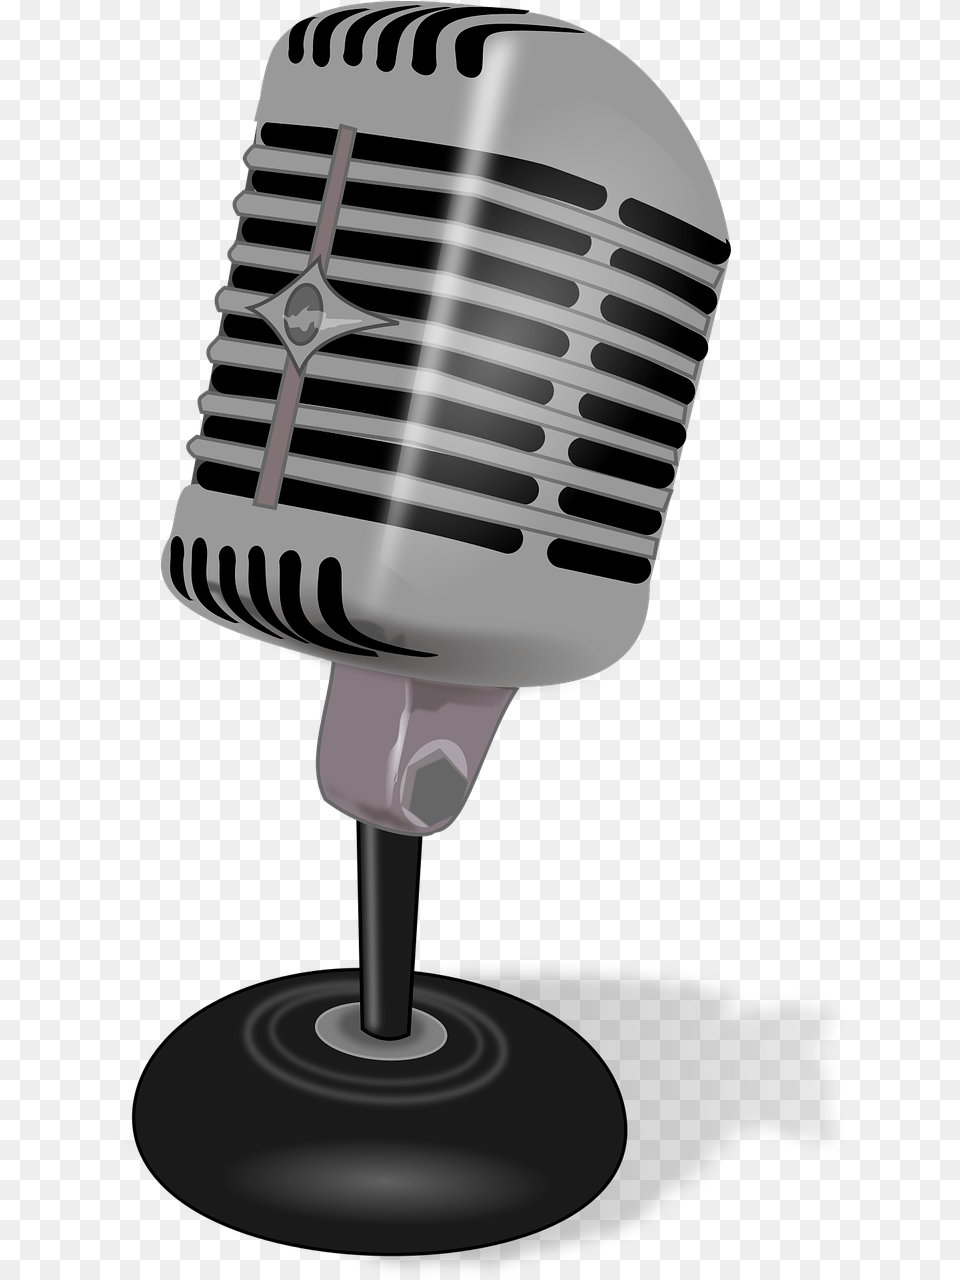 Microphone Free Use, Electrical Device Png Image